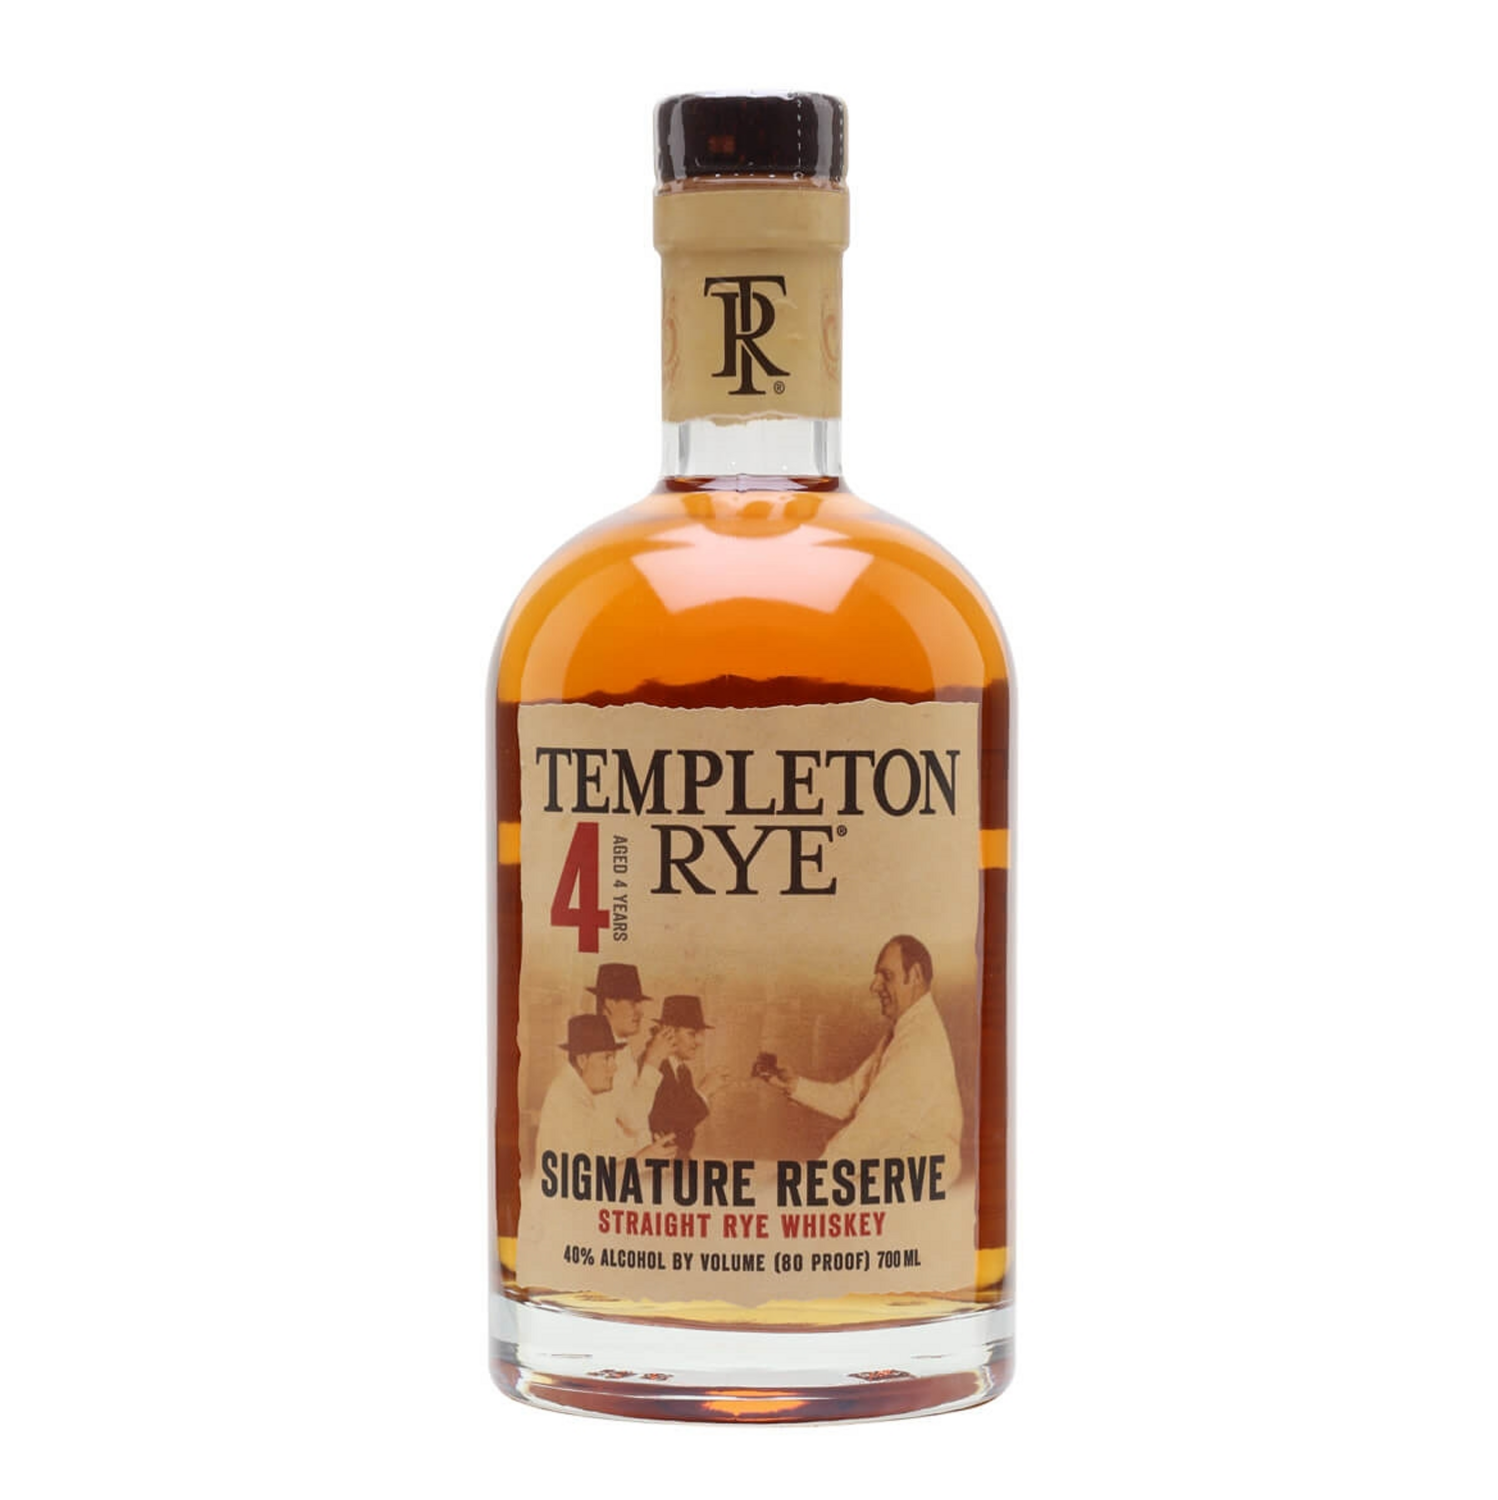 Templeton Rye 4 Year Old Signature Reserve Whiskey